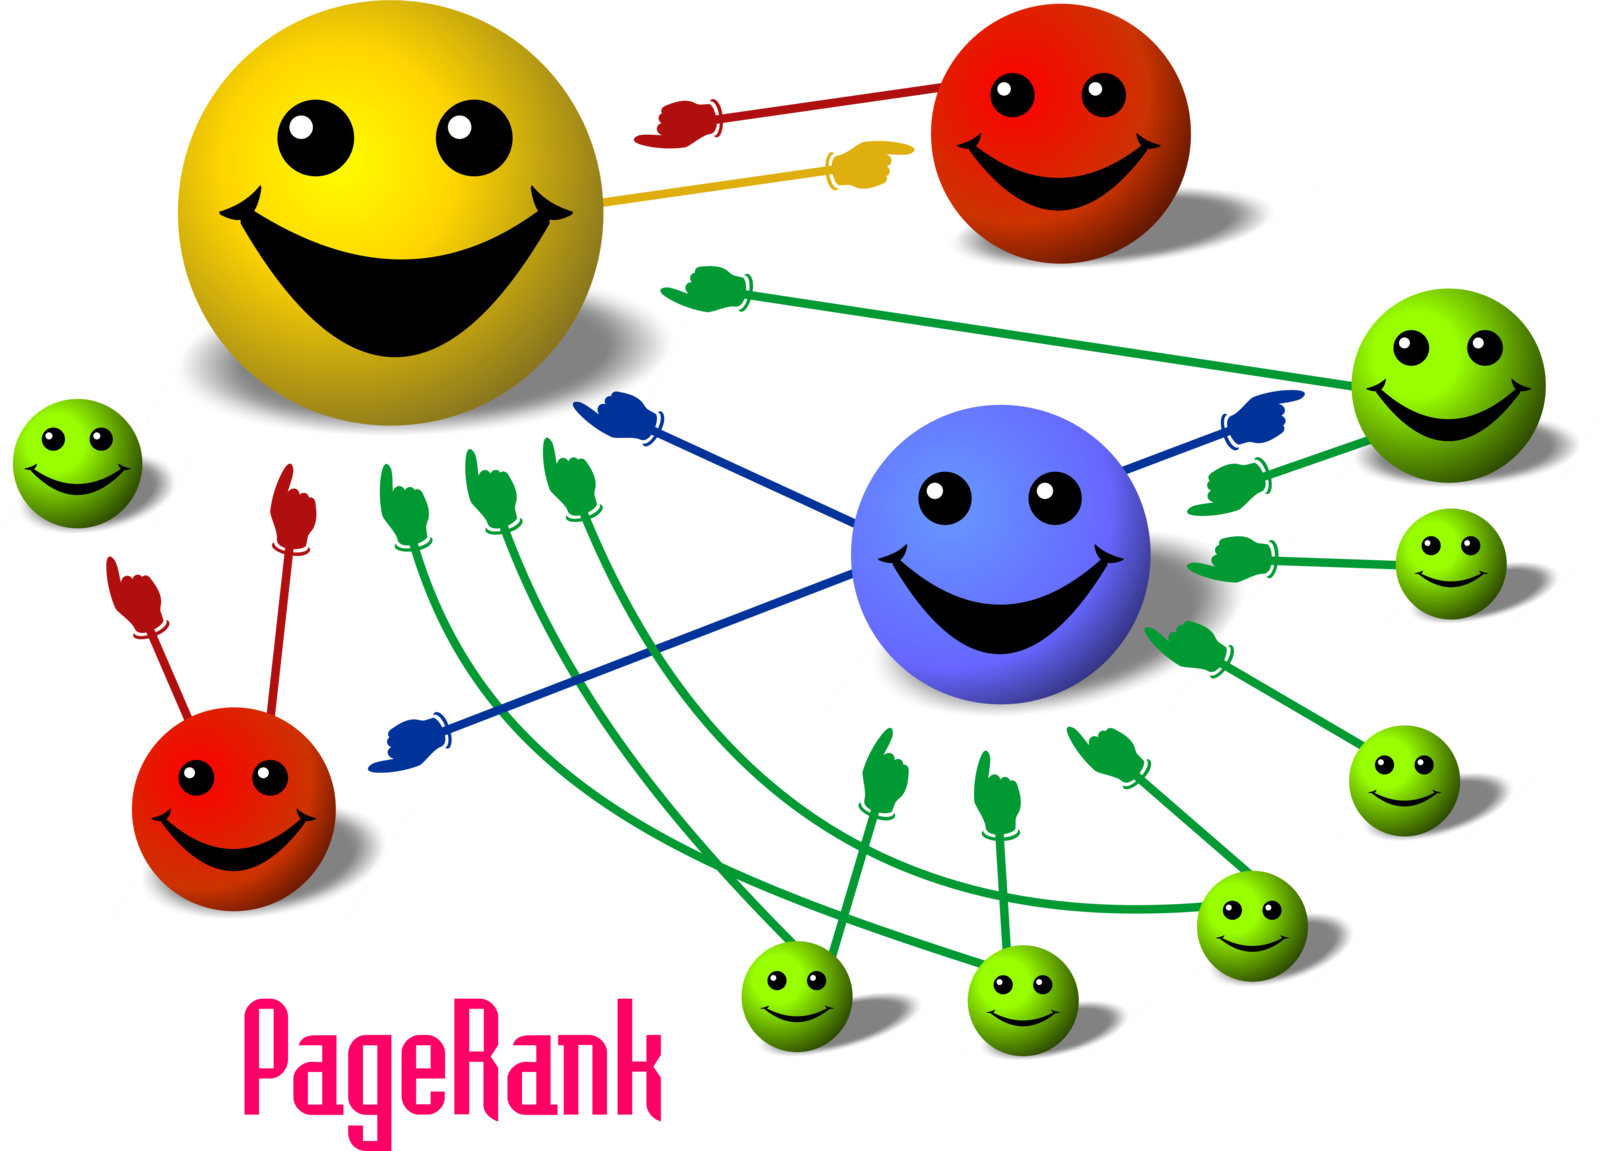 Image depicting the PageRank algorithm